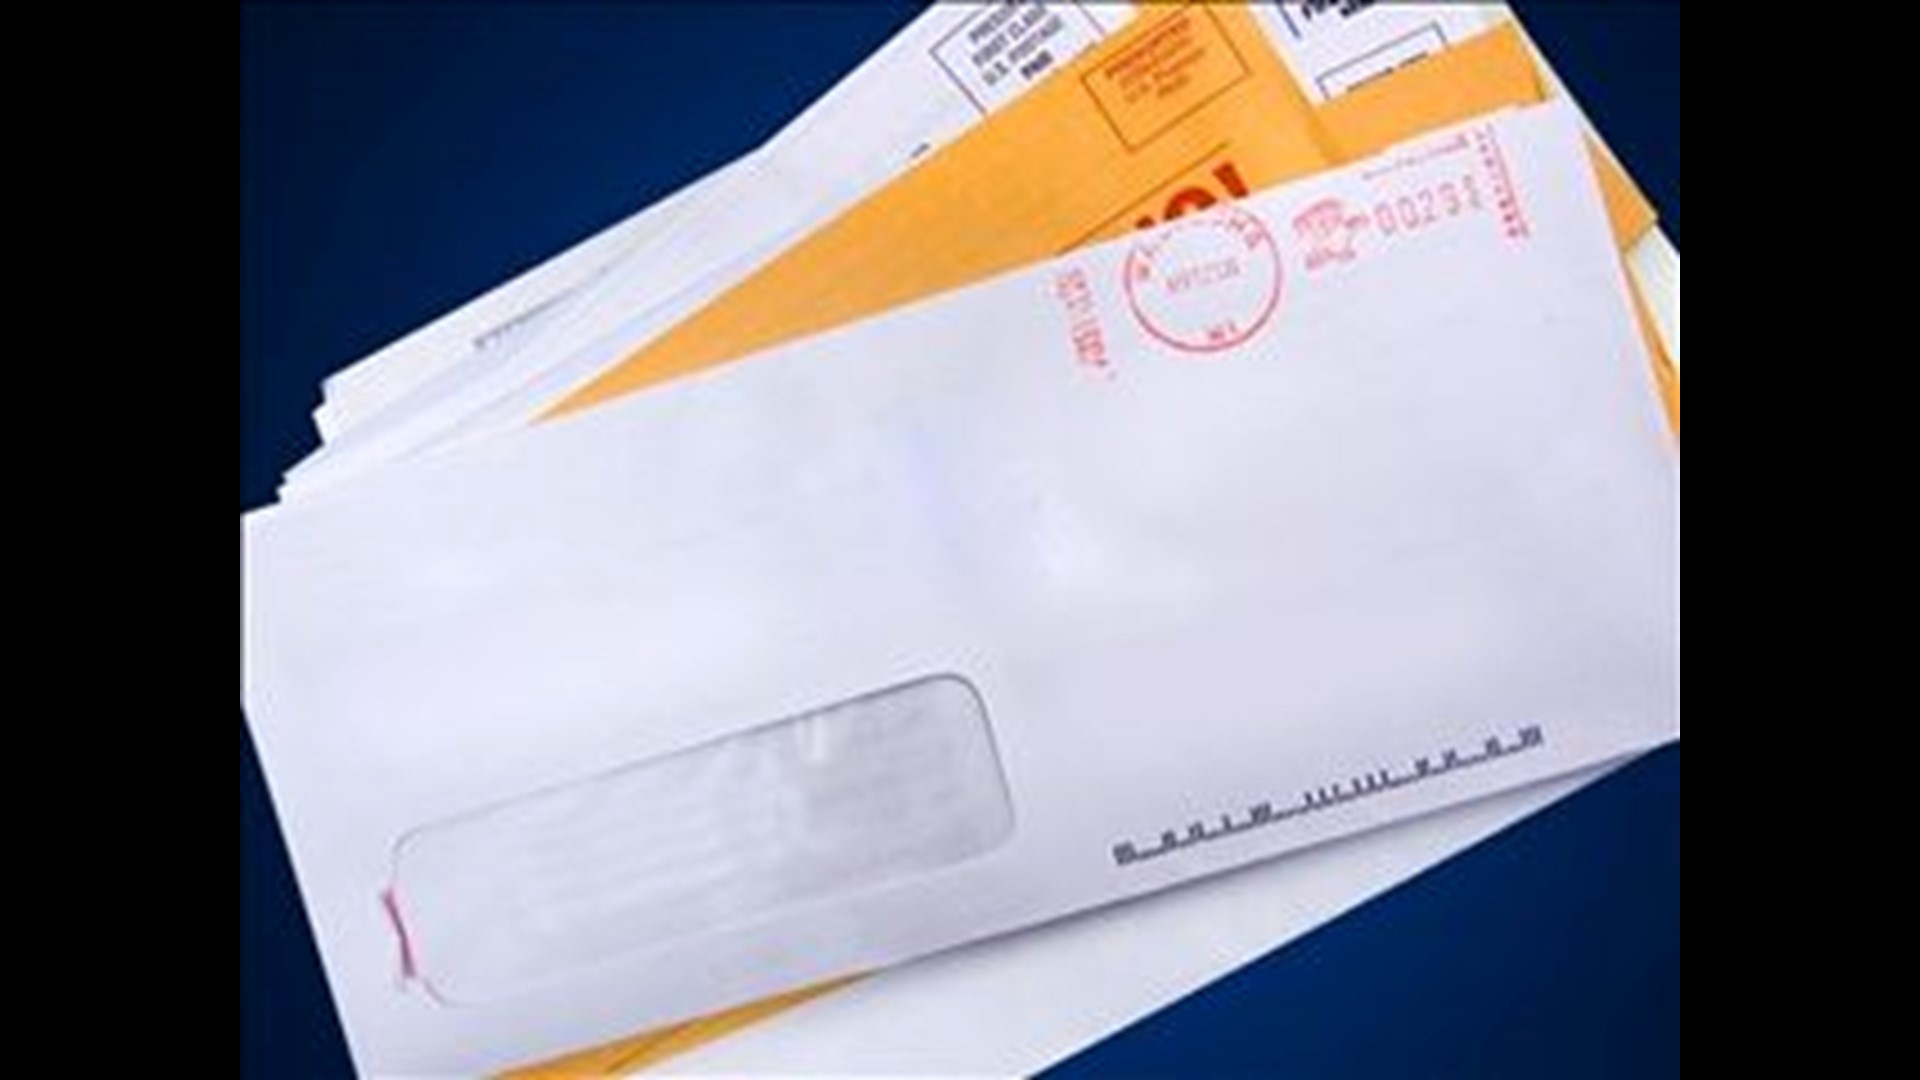 Do companies cover the cost of returned junk mail, even if you overstuff it? Chris Rogers verifies